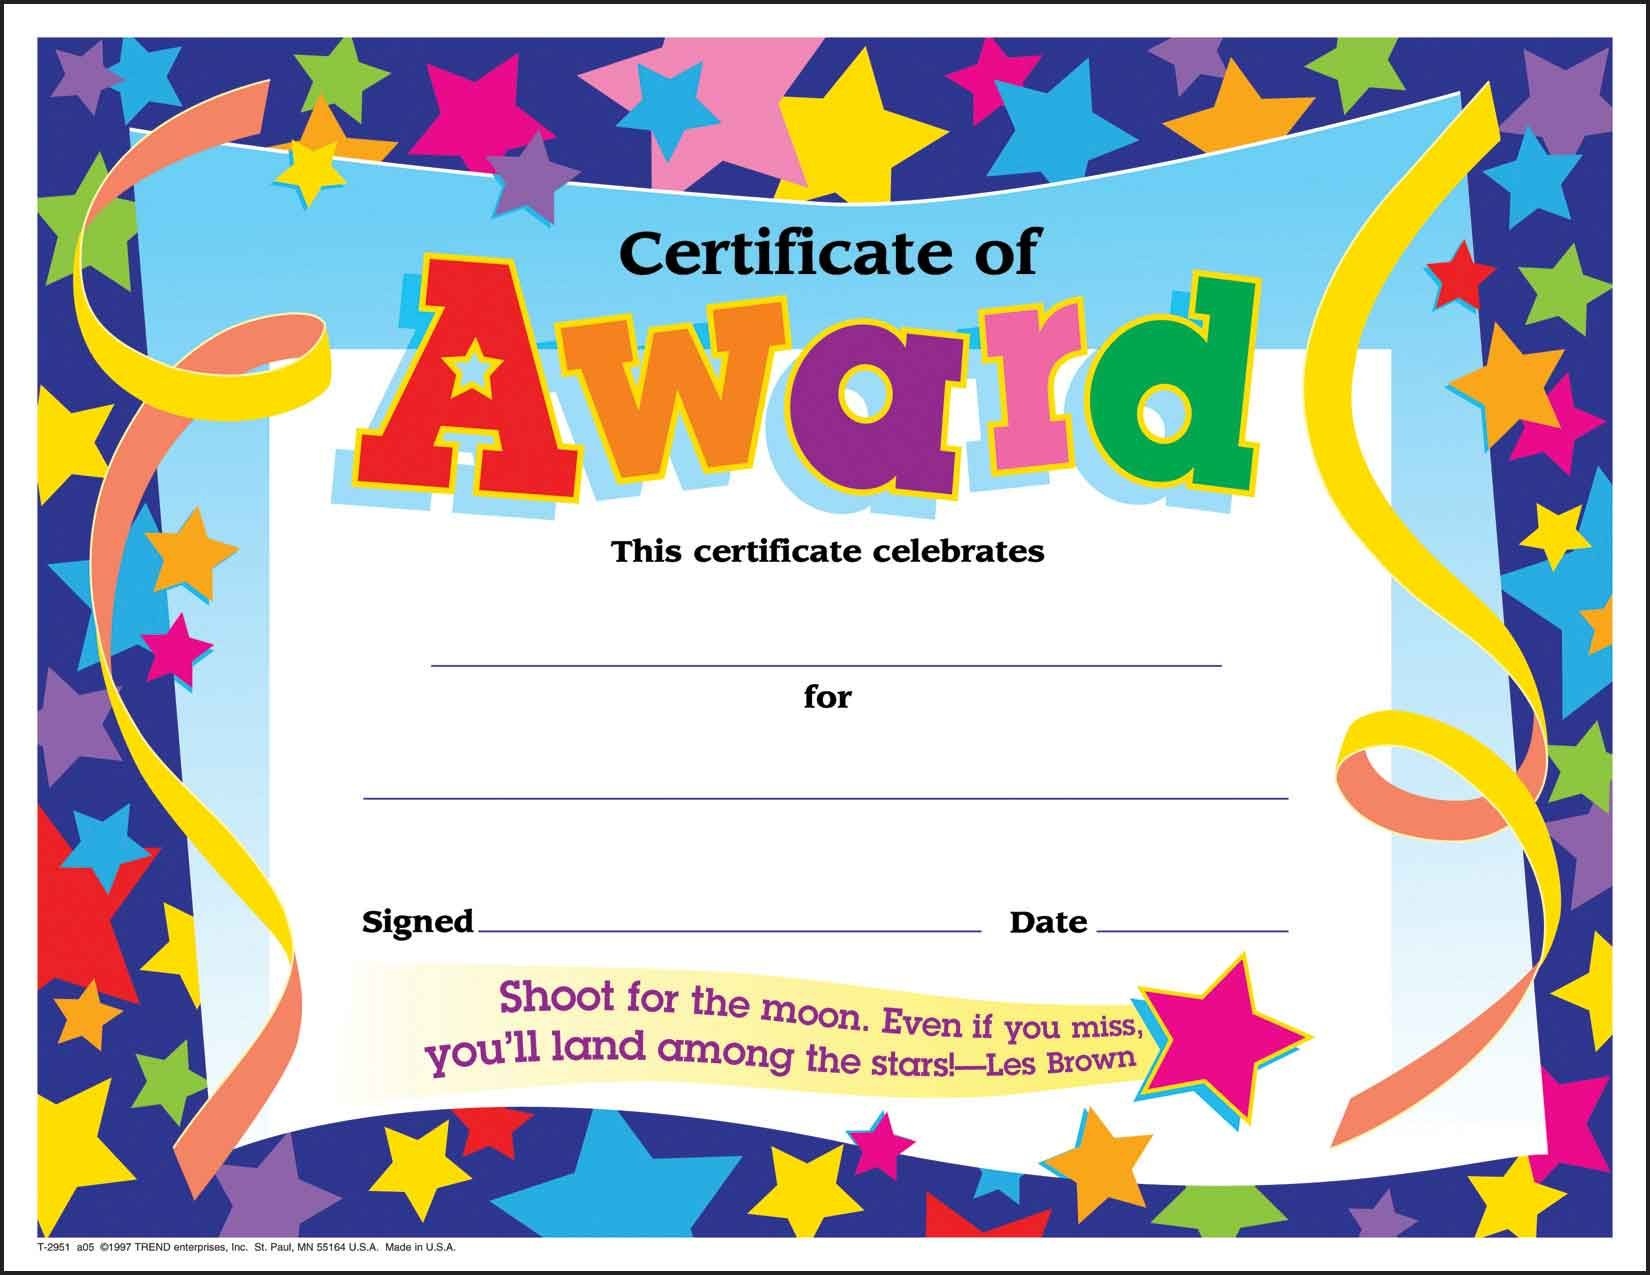 Certificate Template For Kids Free Certificate Templates - Free Printable Certificates For Students